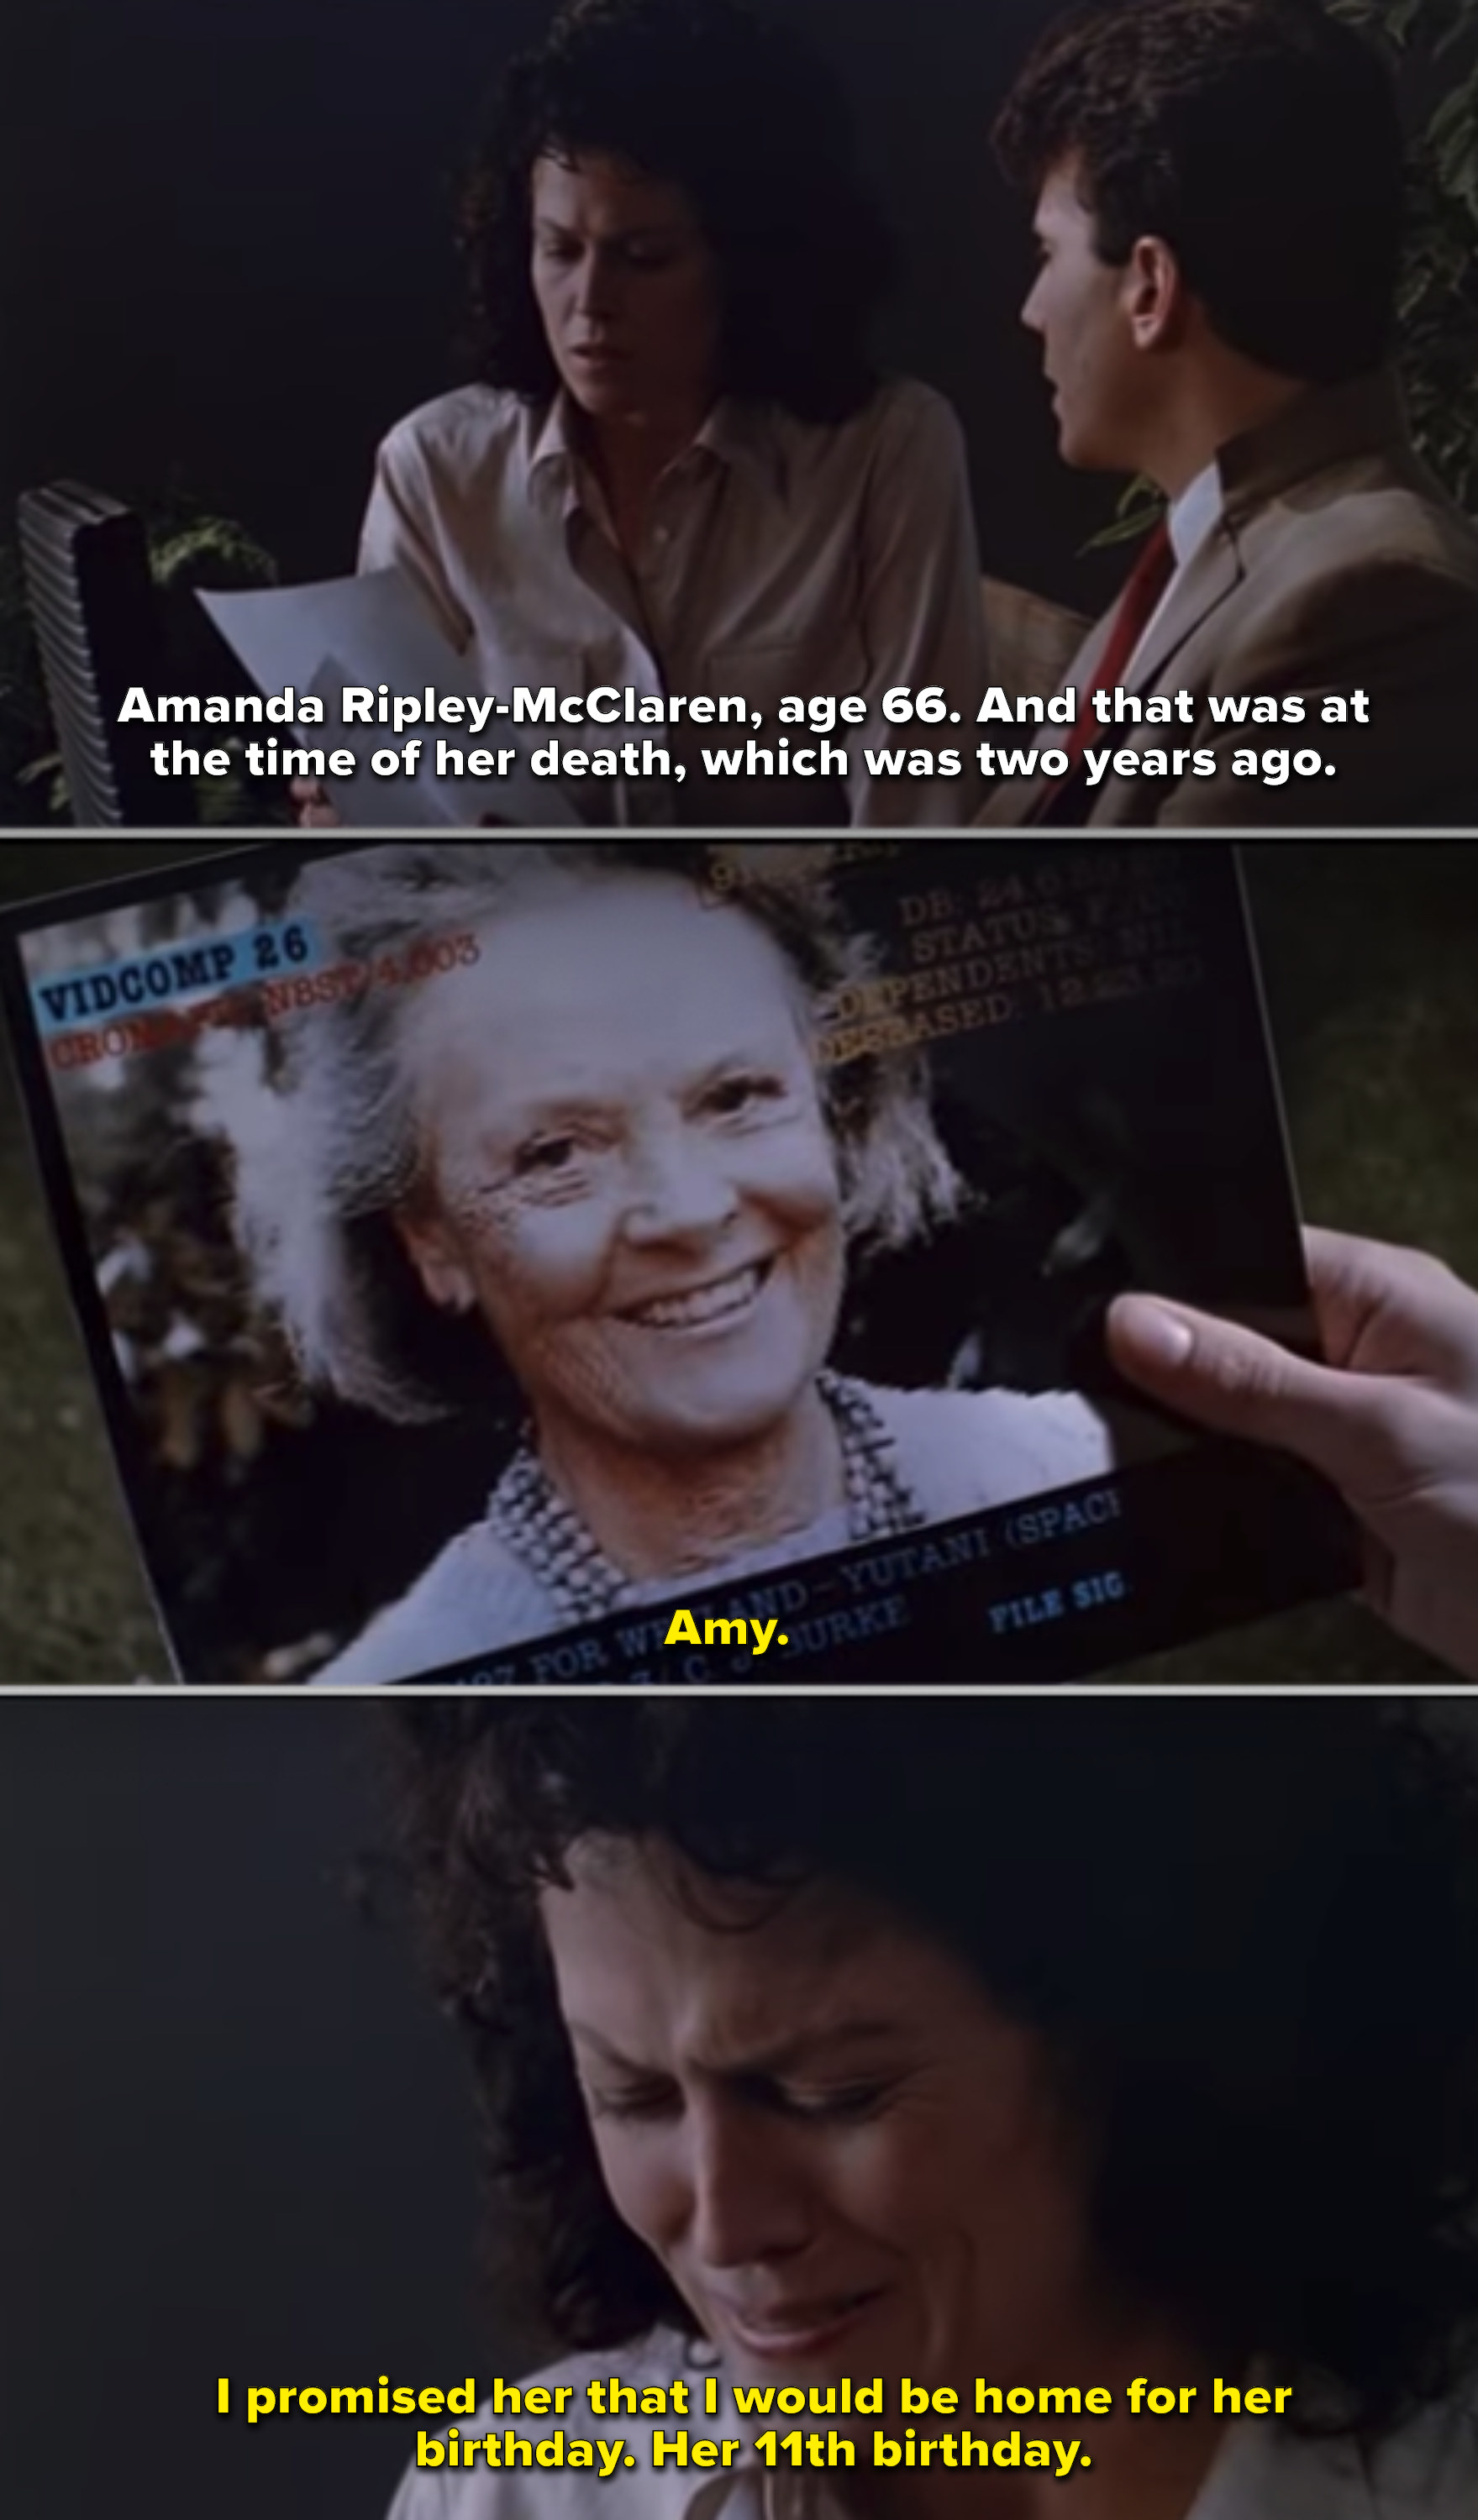 Ripley looking at a picture of her daughter as an old woman